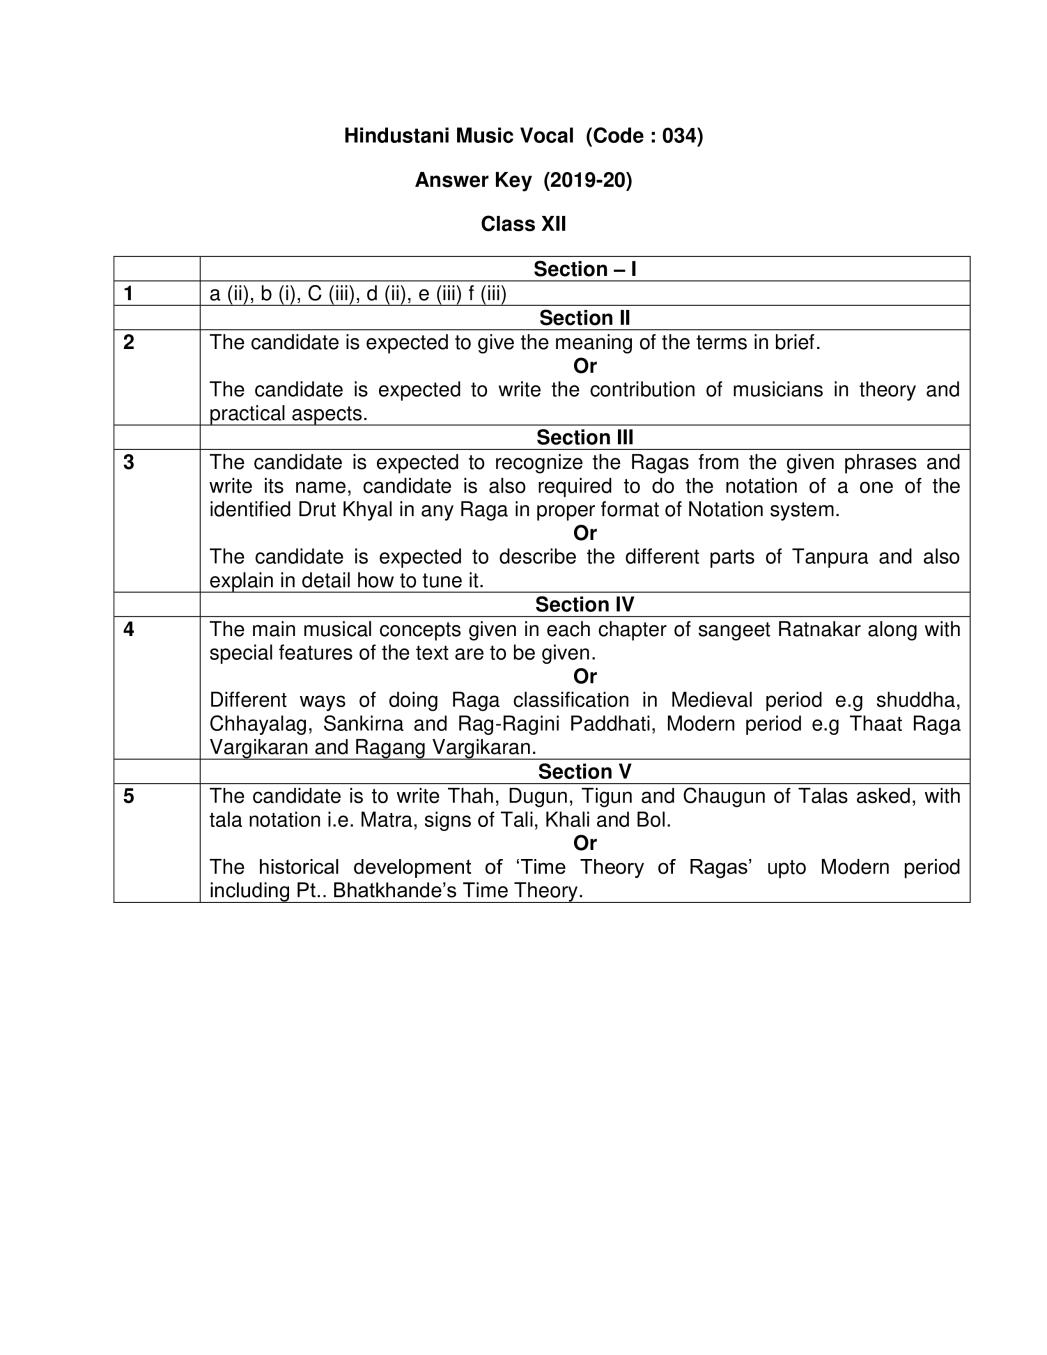 CBSE Class 12 Marking Scheme 2020 for Hindustani Music Vocal - Page 1